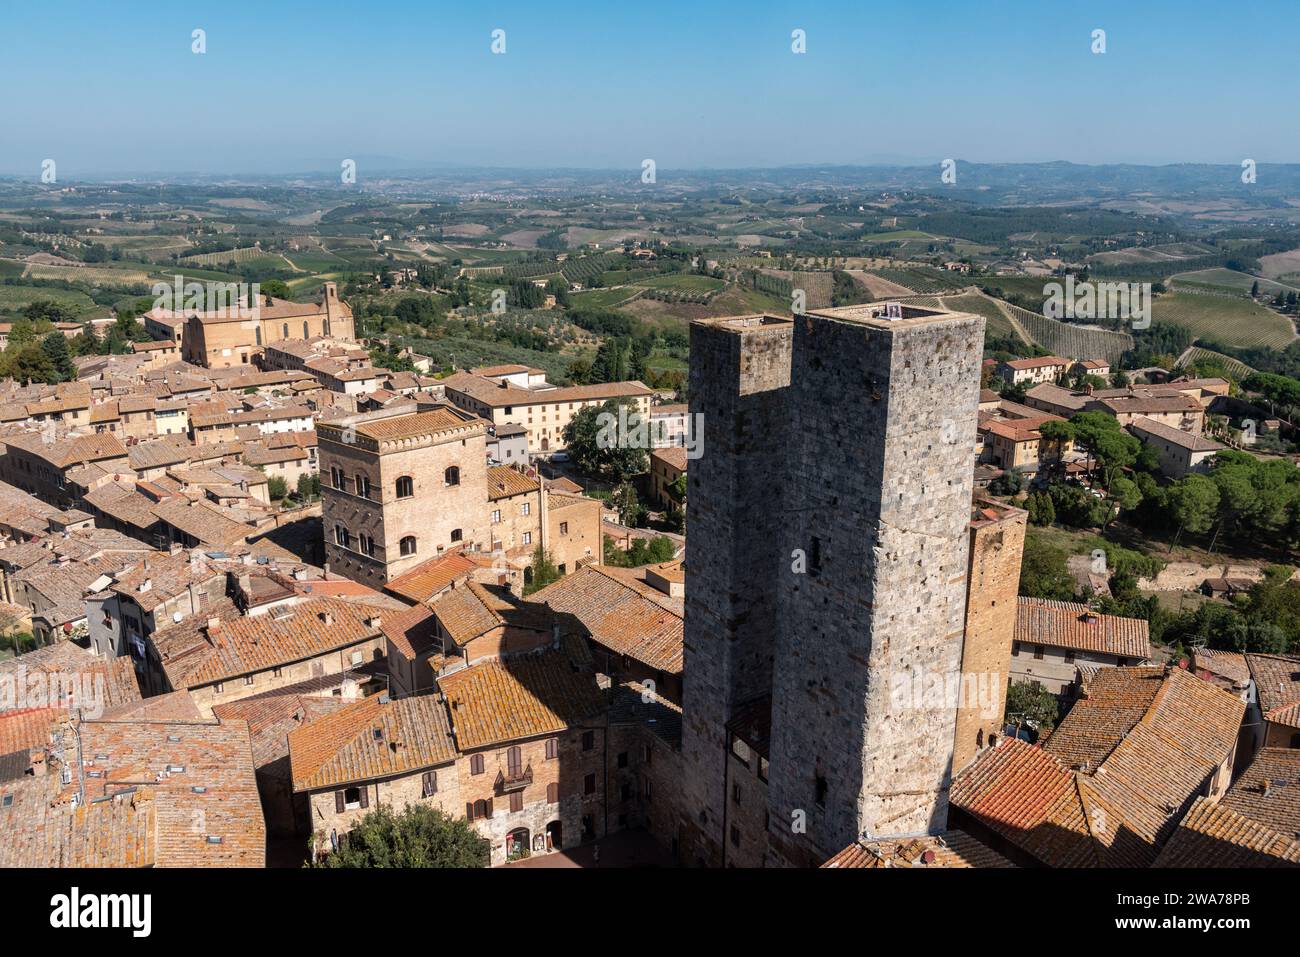 Wide panoramic view over downtown San Gimignano, Torri dei Salvucci in the center, seen from Torre Grosso, Italy Stock Photo